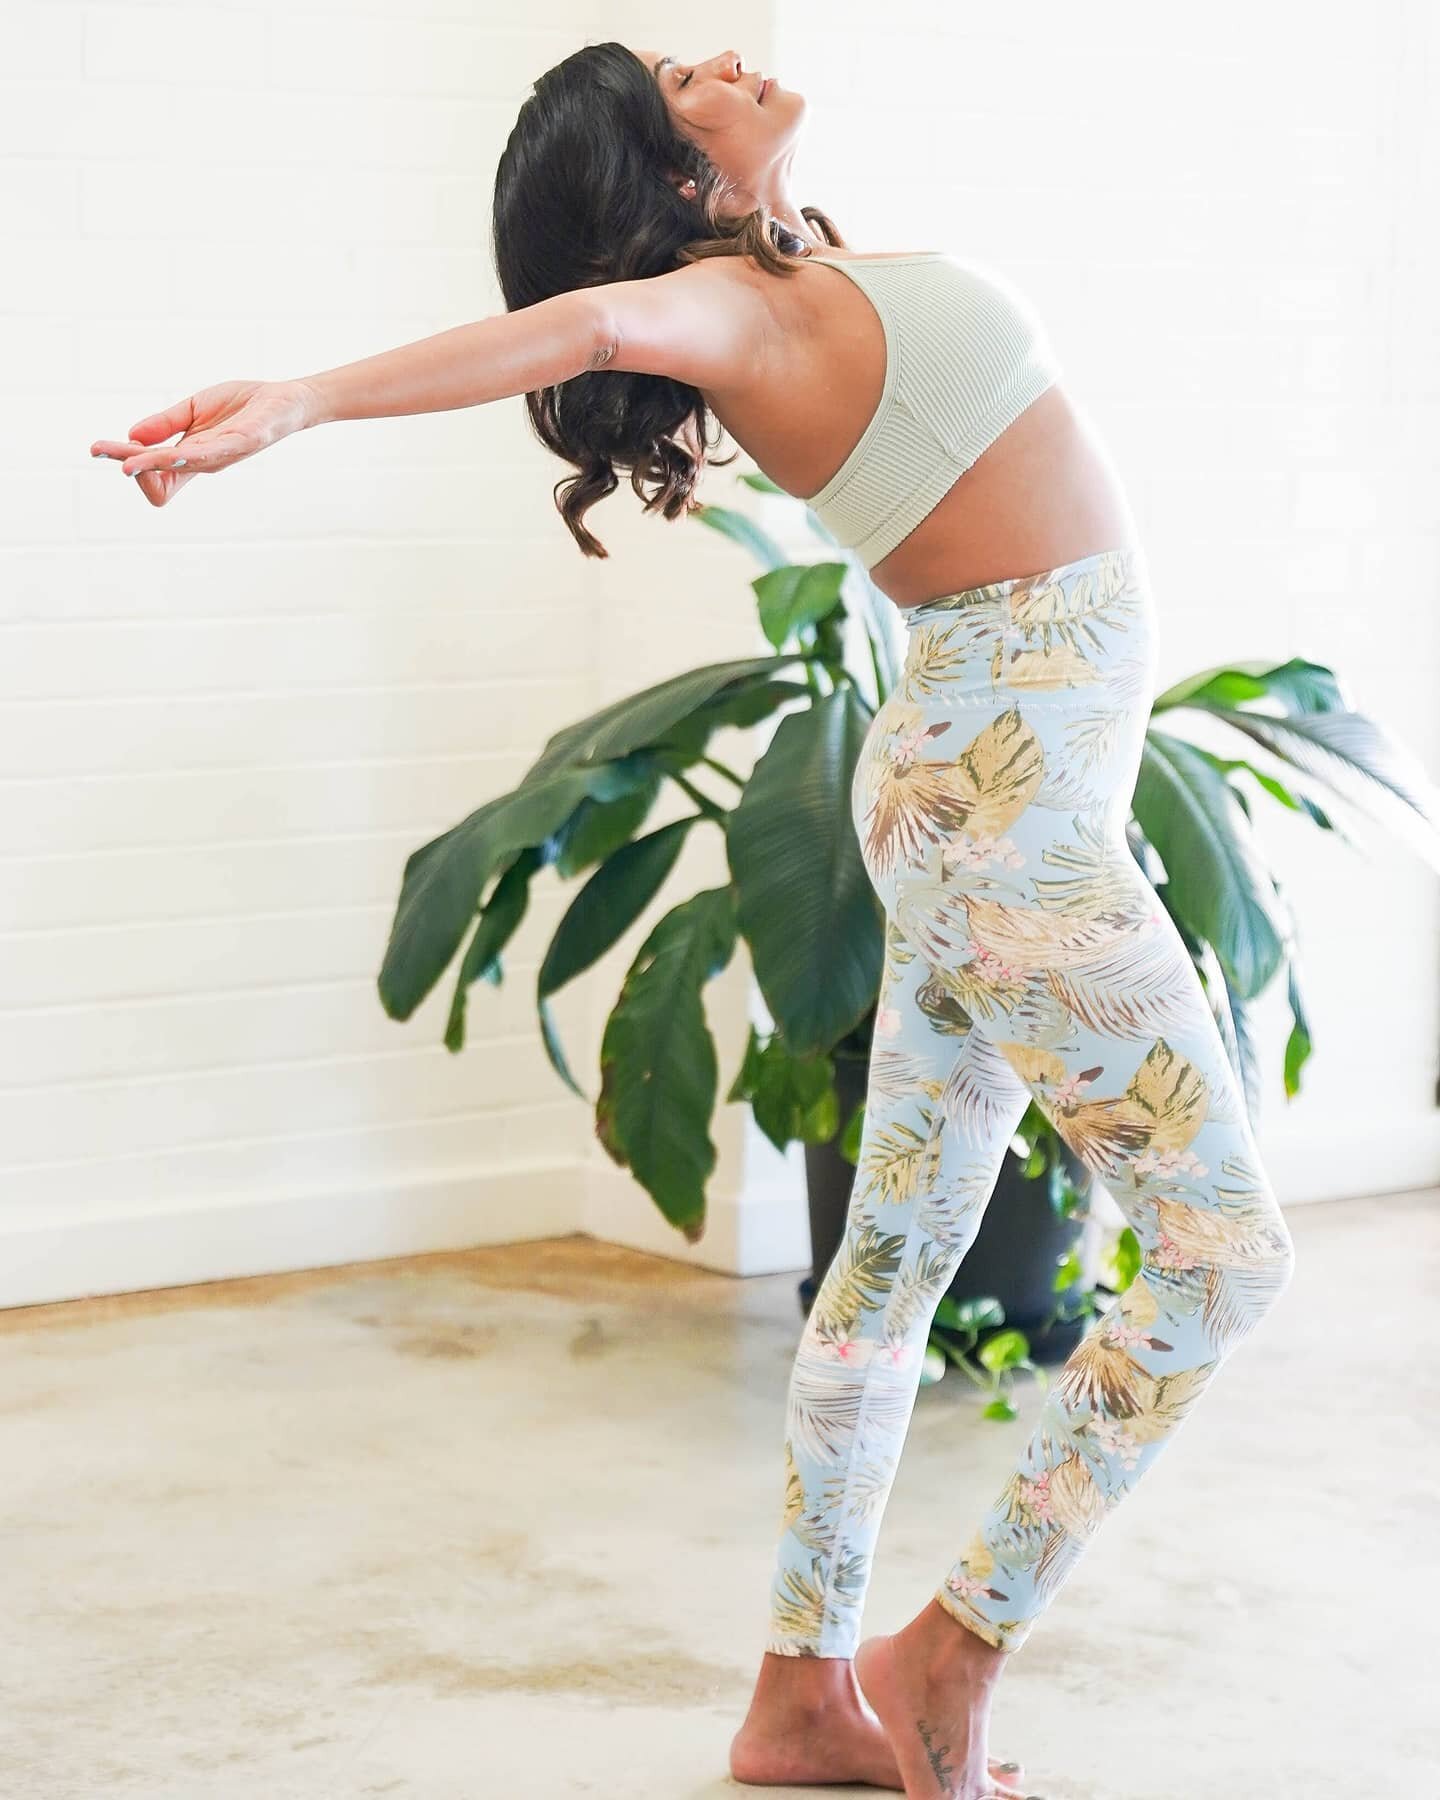 Did you know that the benefits of a mindful Yoga flow include: ⁣
⁣
✔Improved Sleep ⁣
✔Less Stress from focusing on your breath⁣
✔Increased concentration⁣
✔Better immunity⁣
✔Feeling happy and content⁣
✔Less physical pain⁣
✔Increased self awareness⁣
✔R